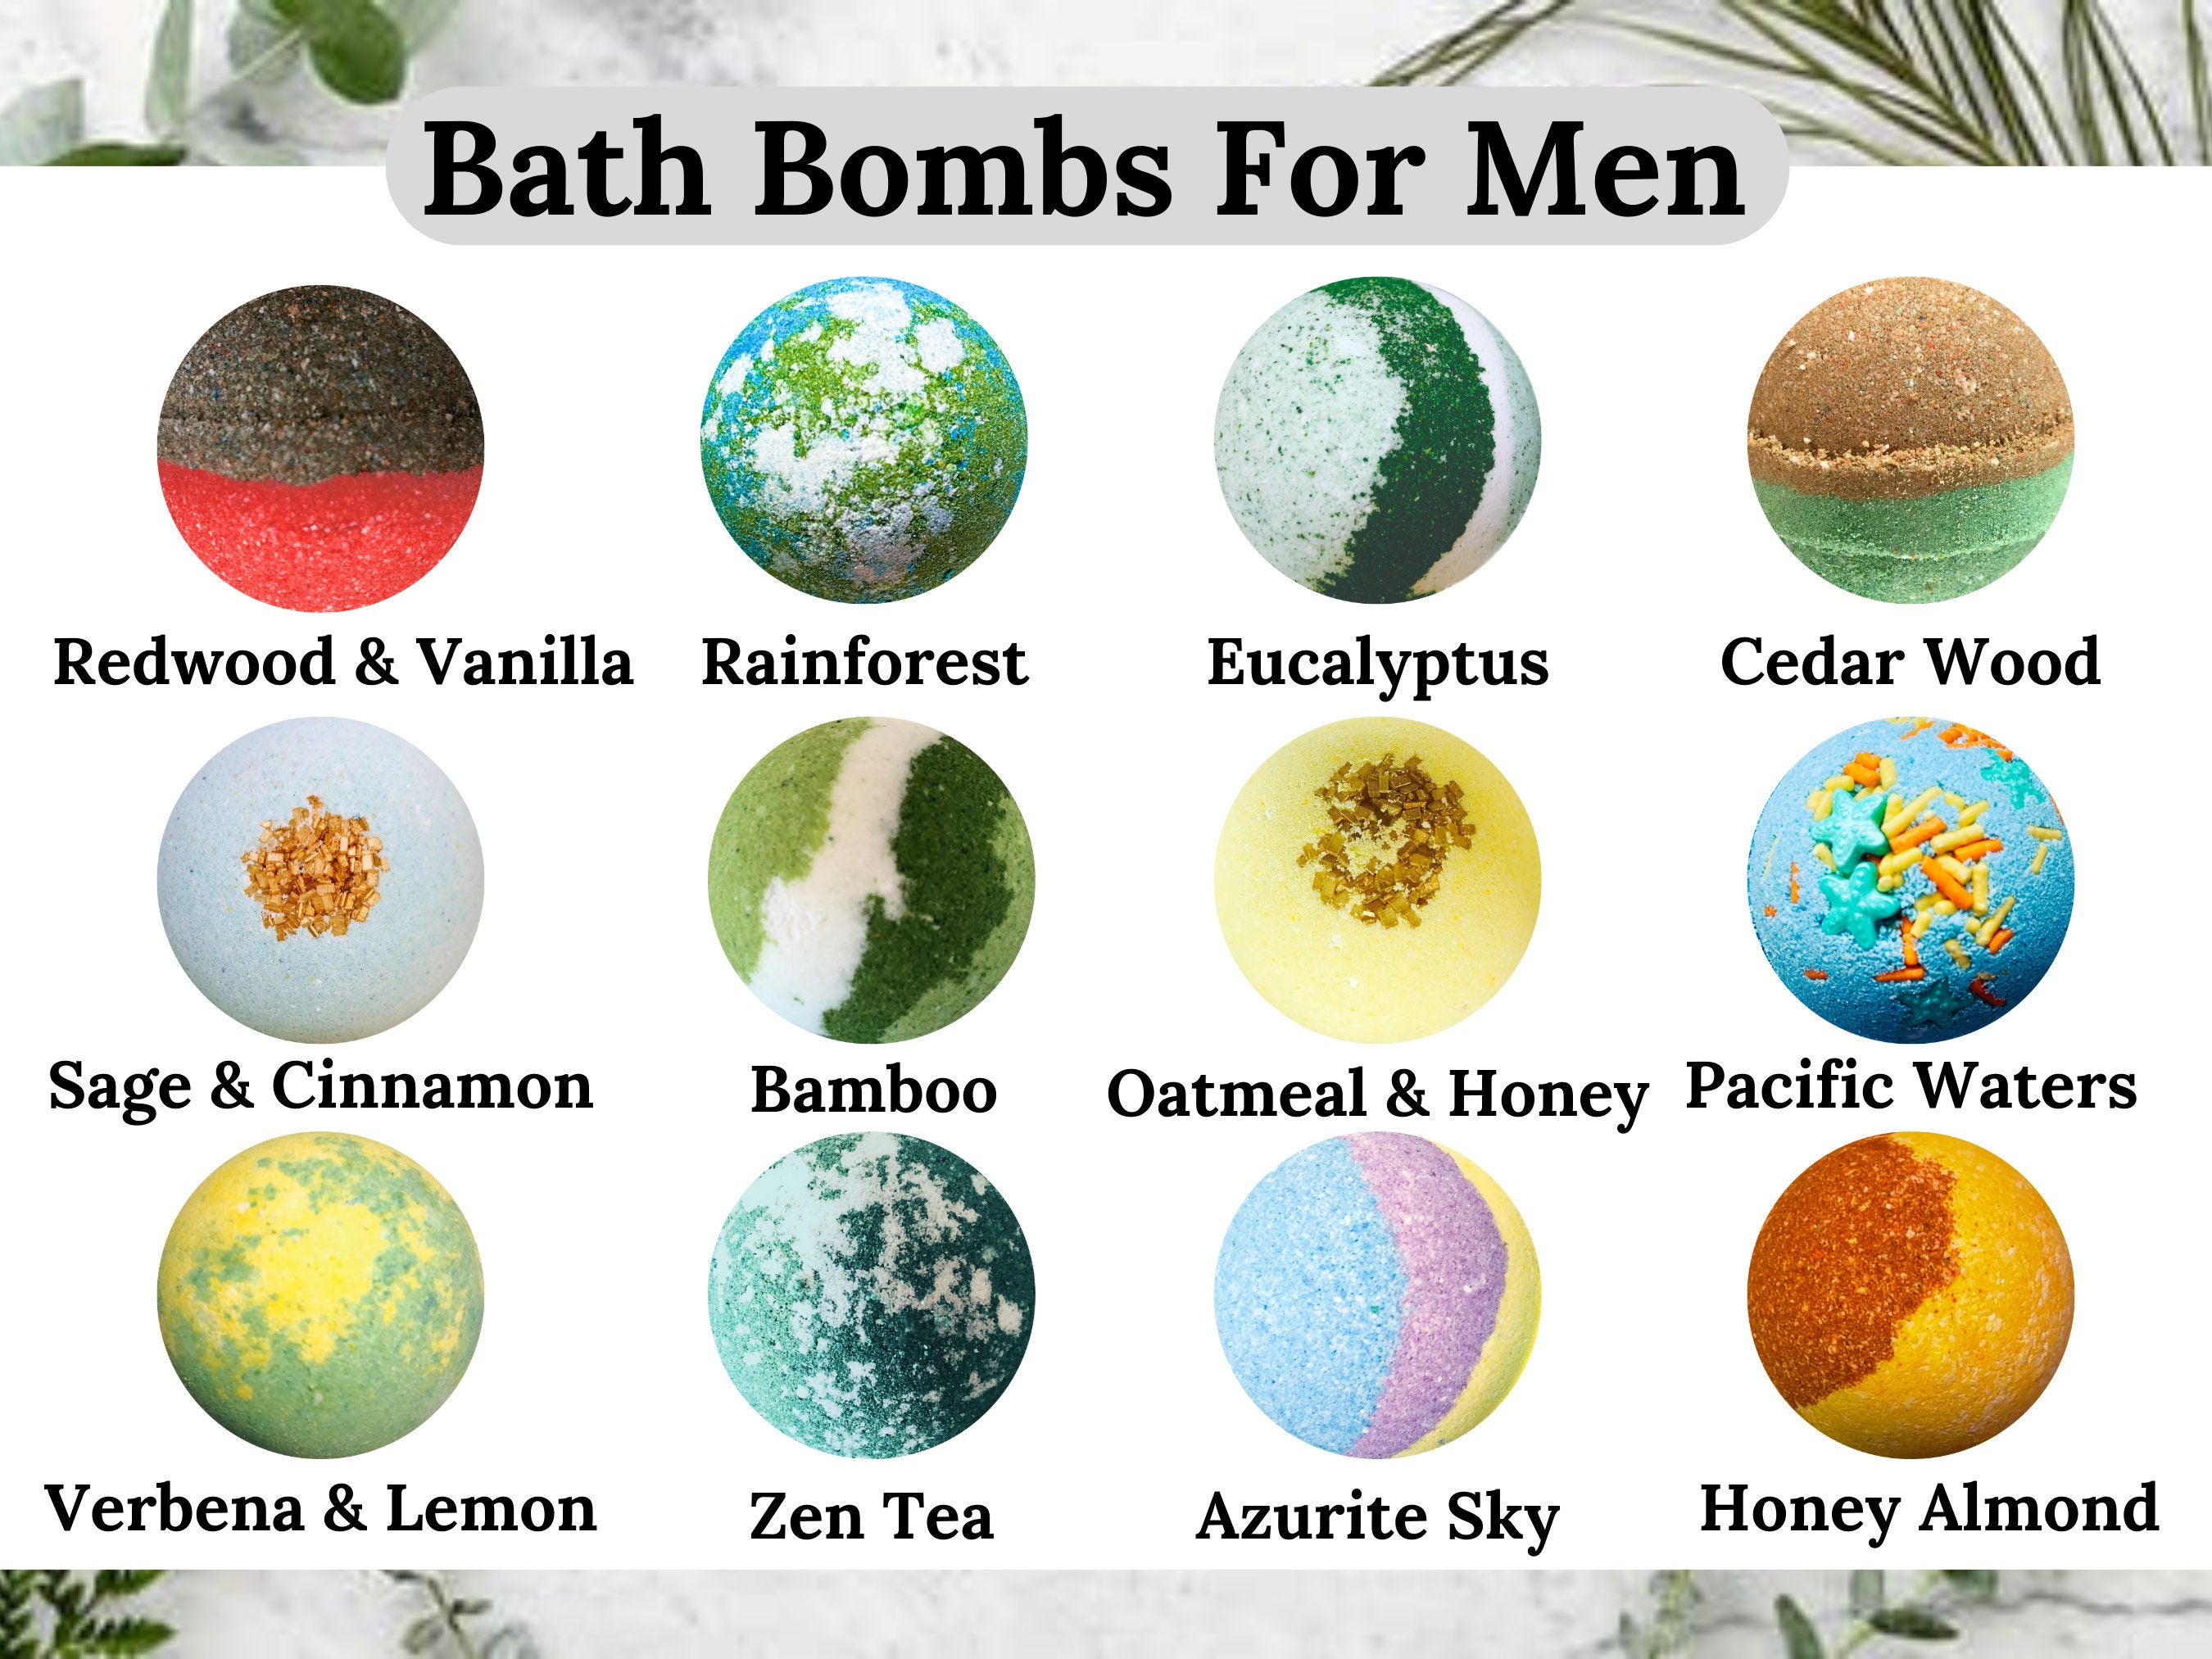  It's Just - Citric Acid, Food Grade, Non-GMO, Bath Bombs (2.5  Pounds) : Beauty & Personal Care